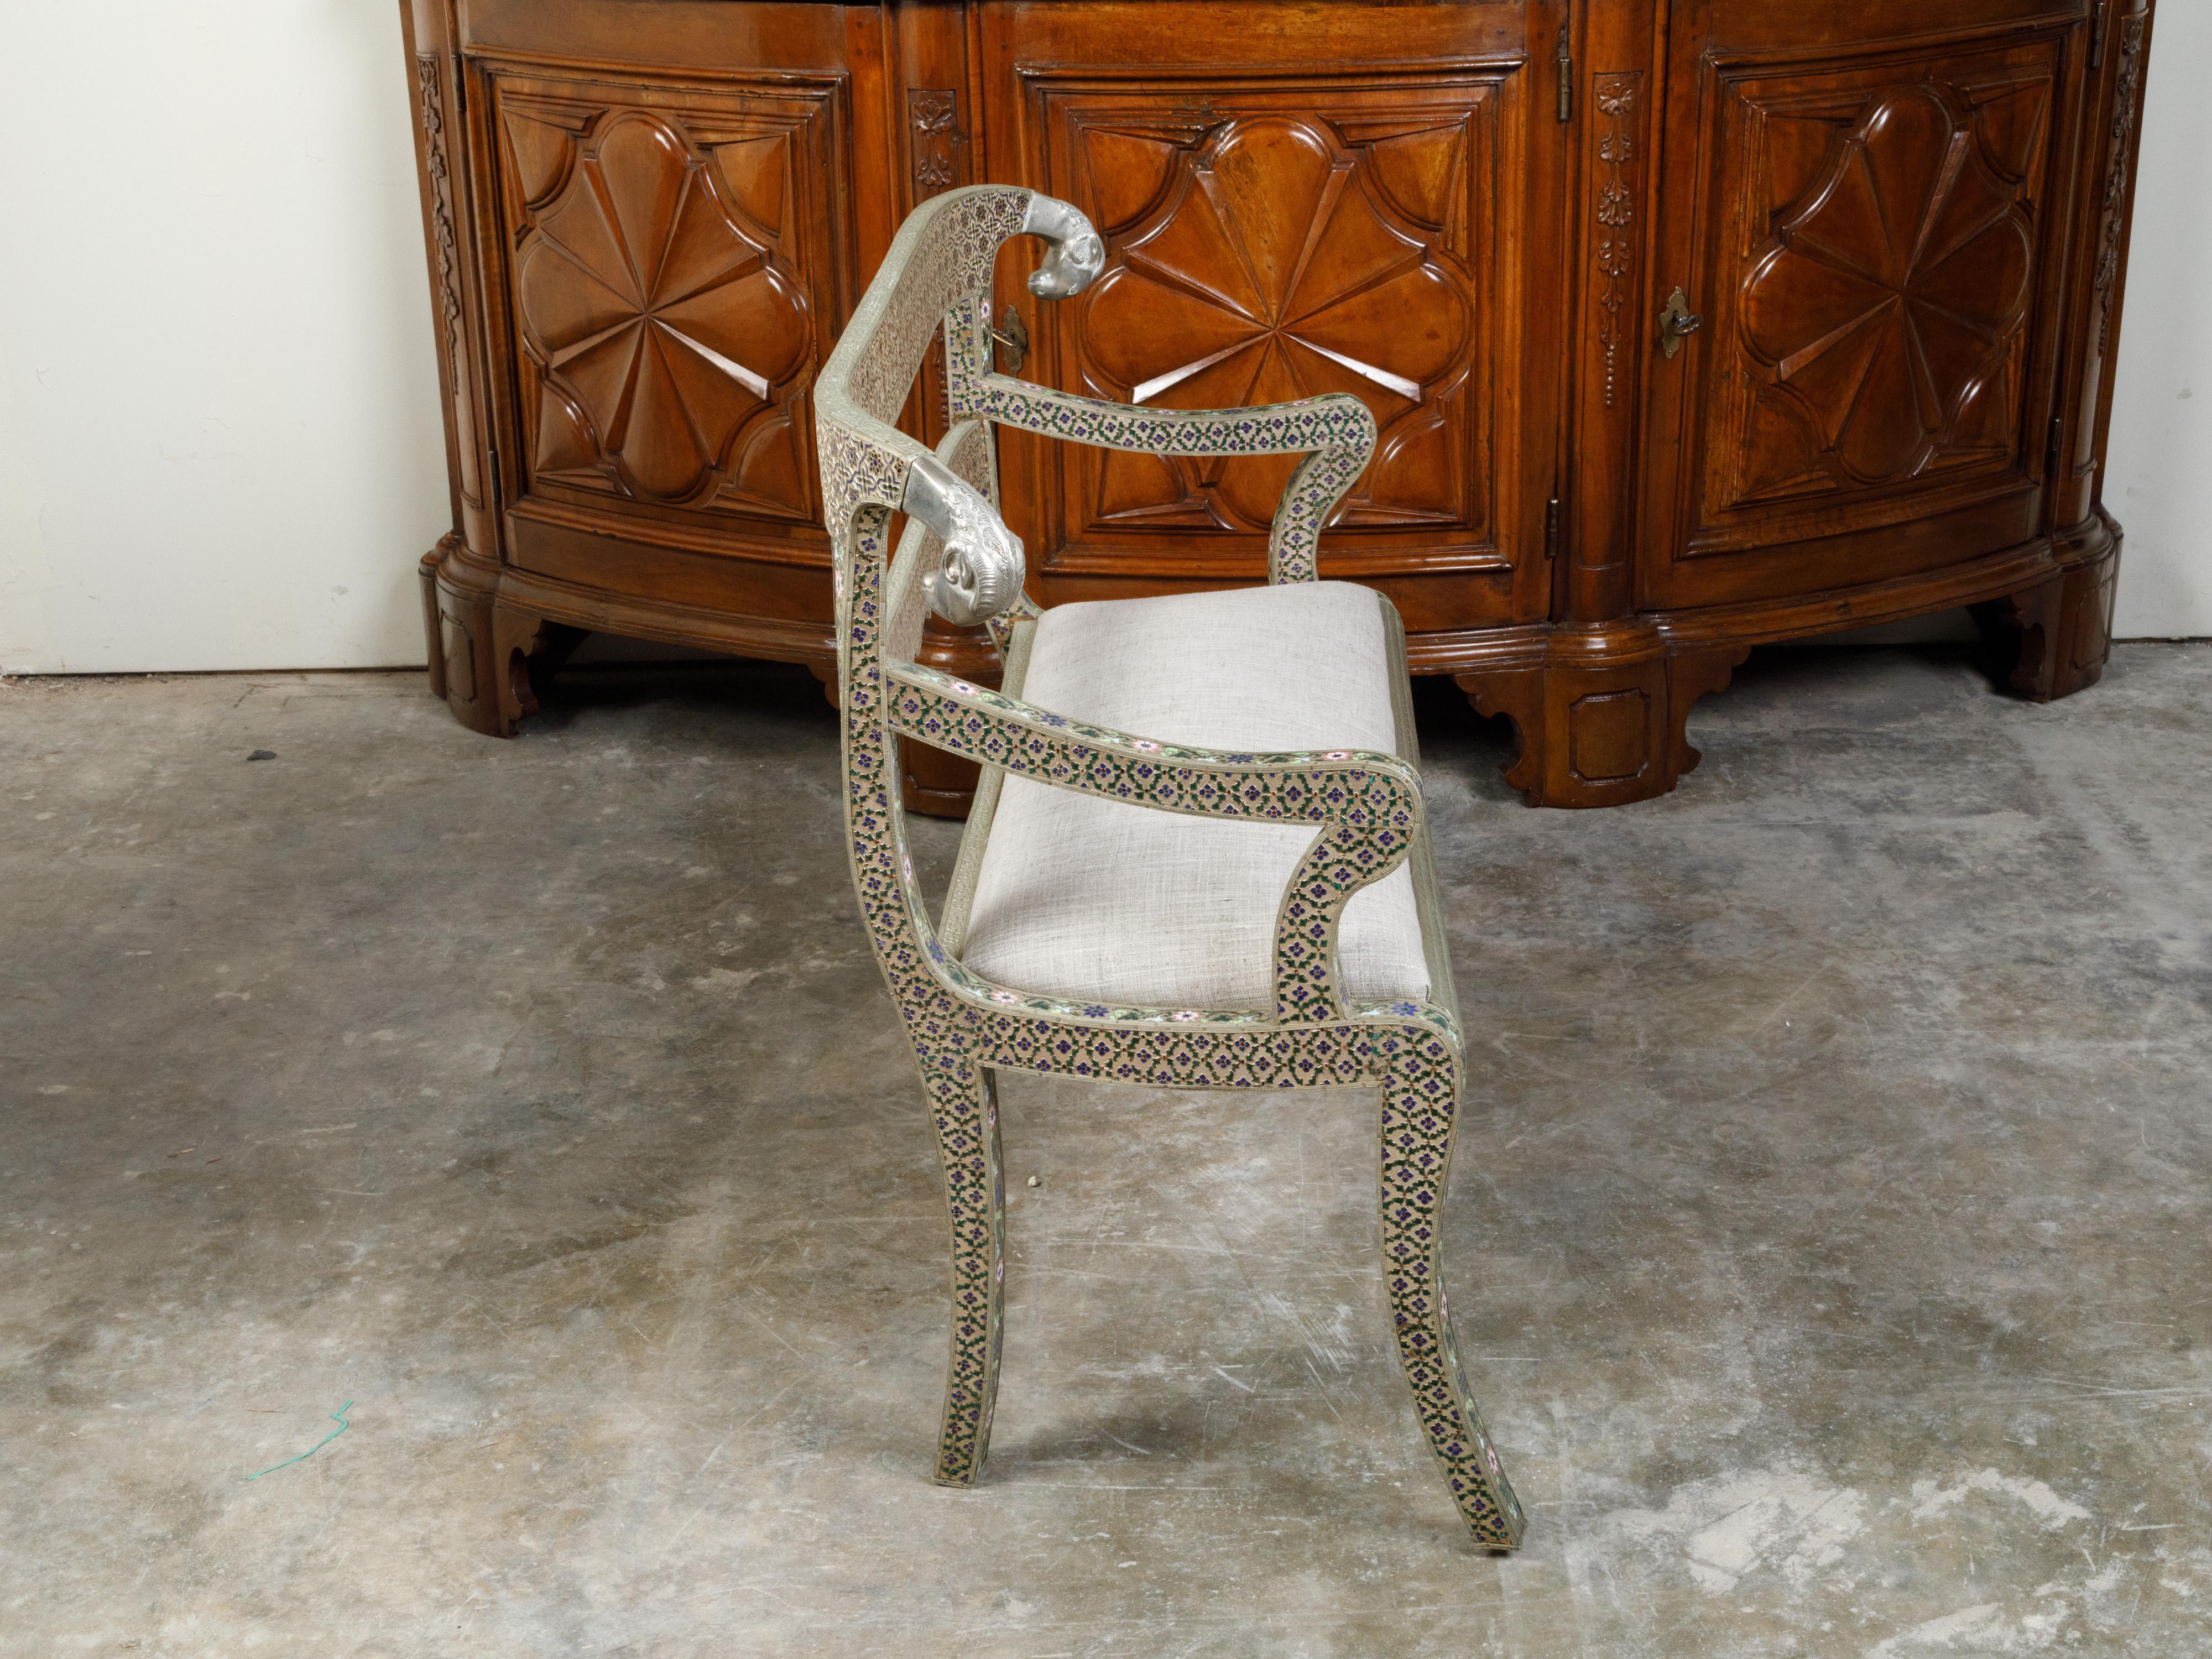 1930s Moroccan Metal Upholstered Settee with Enamel Décor and Rams' Heads For Sale 1